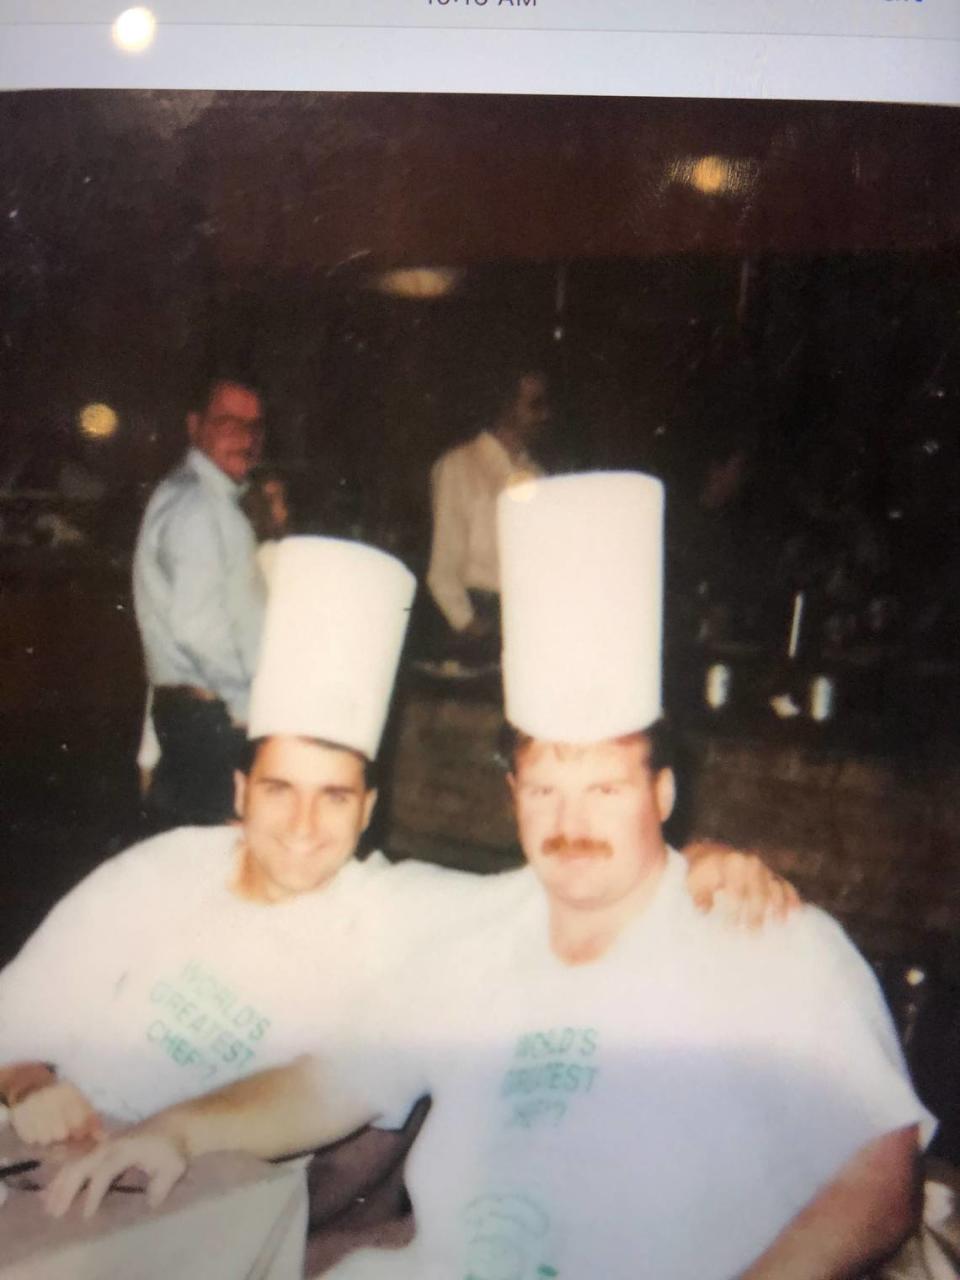 Andy Reid and Steve Mariucci got this photo on the wall of the Prime Quarter in Green Bay, Wisconsin.